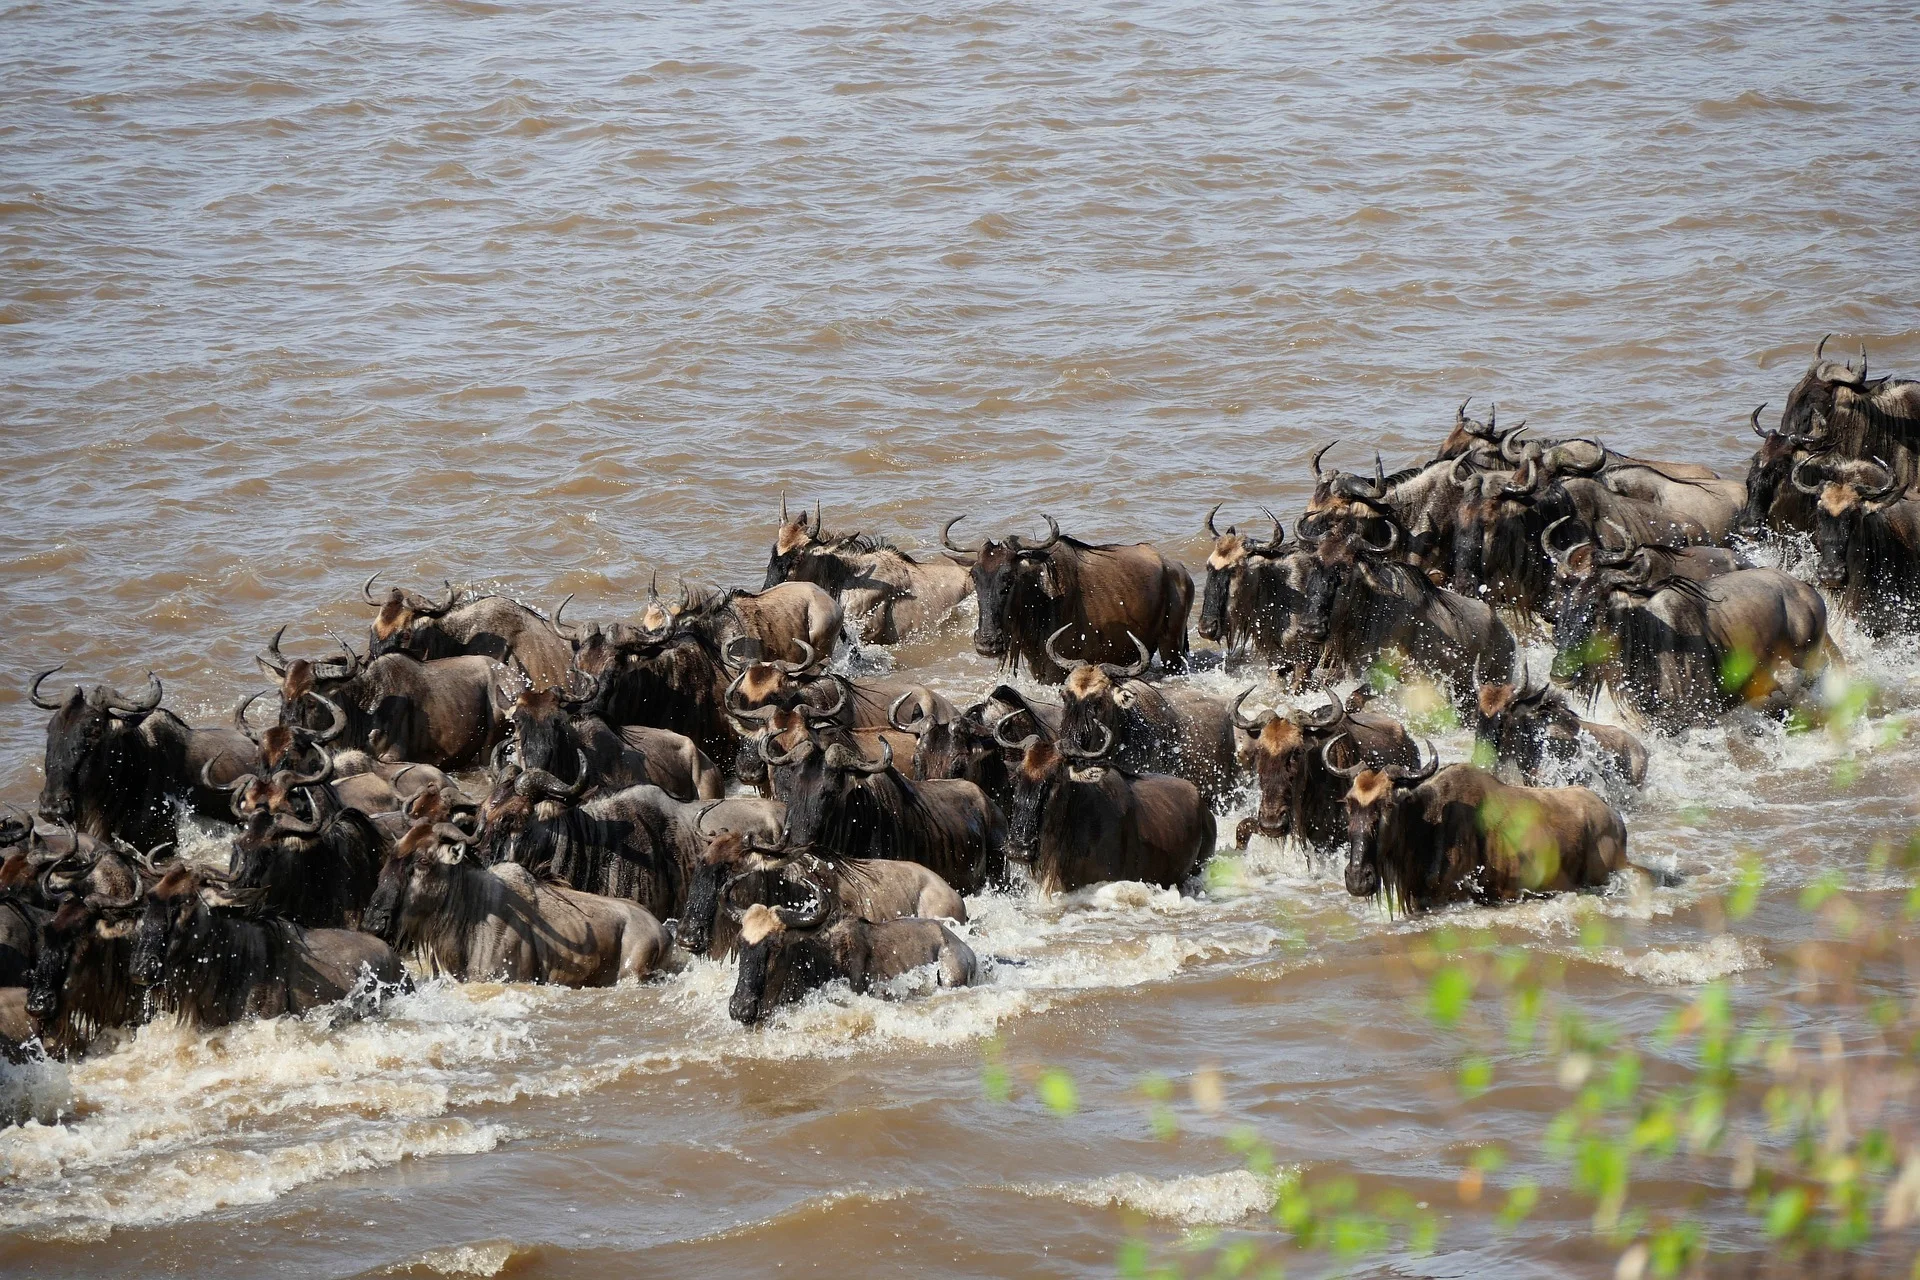 A herd of wildebeest crossing a river during the Great Migration in Kenya in August